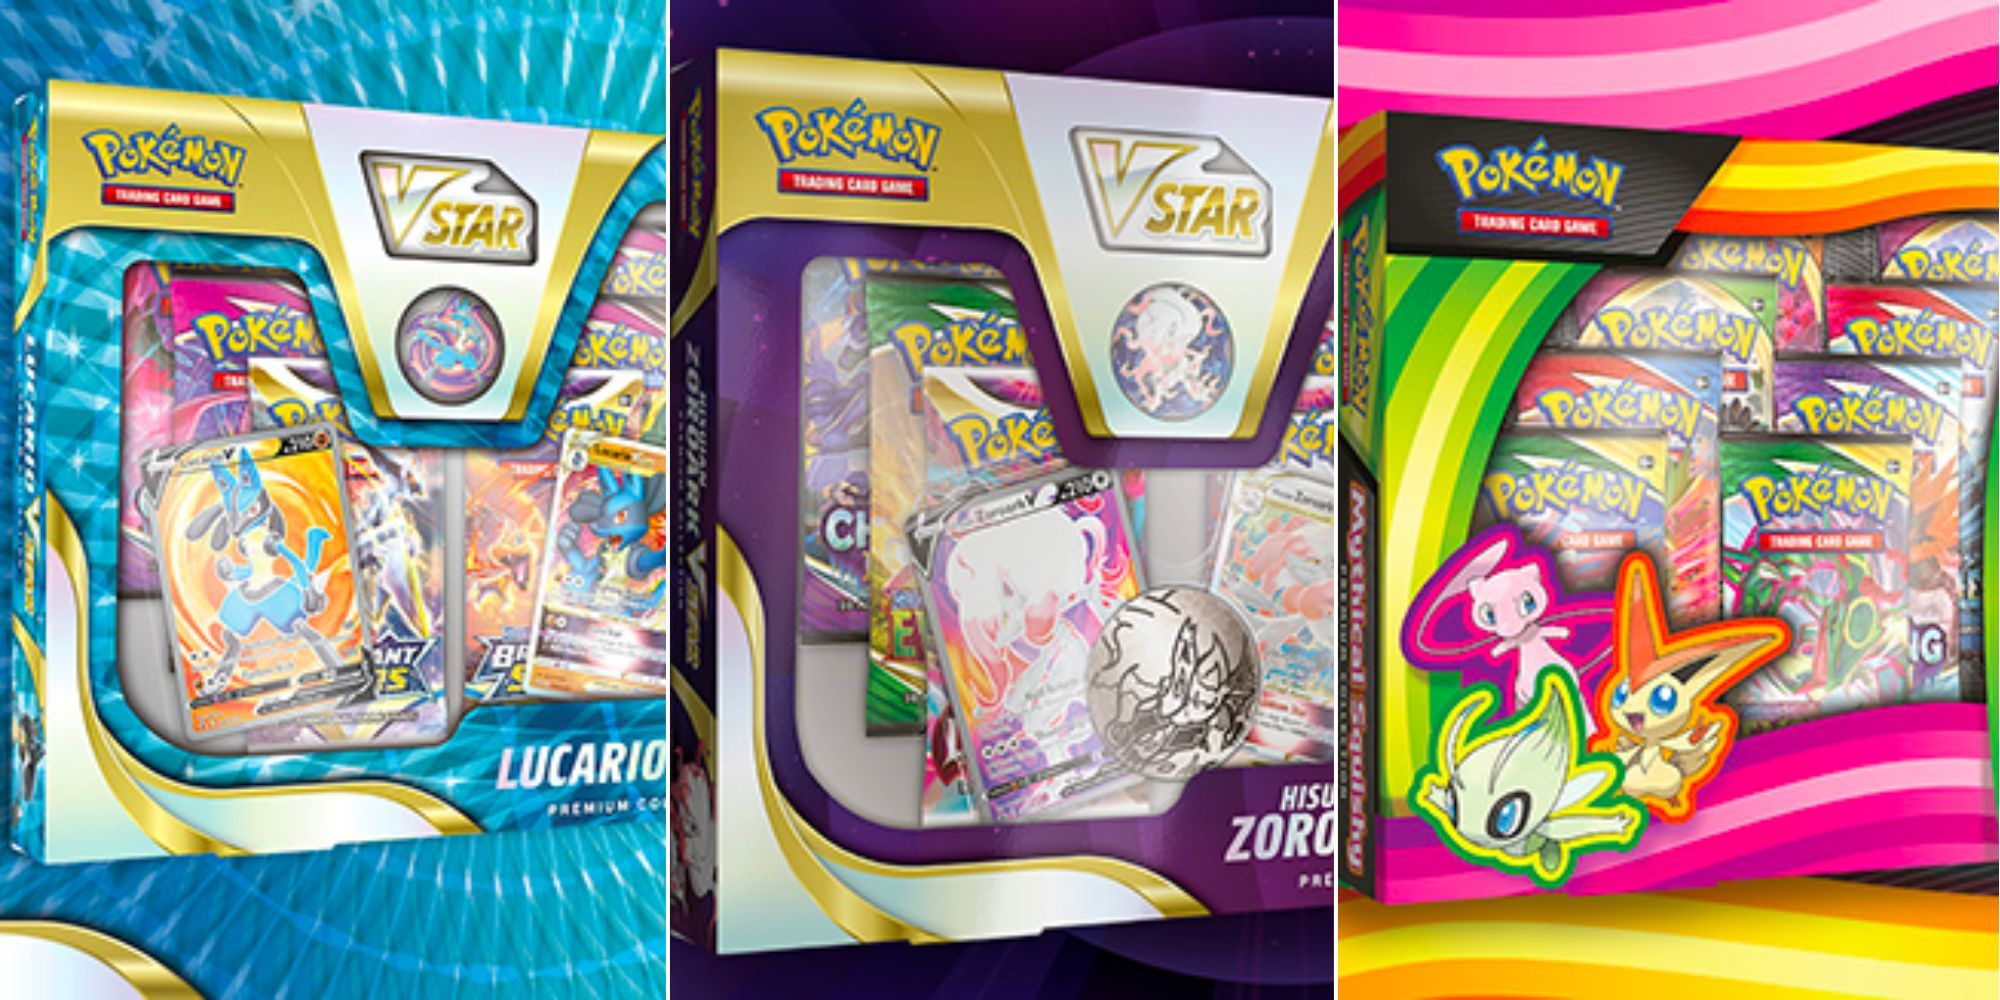 Pokemon TCG: The X Best Premium Collections: Feature Image With Lucario, Hisuian Zoroark and Mythical Pokemon sets